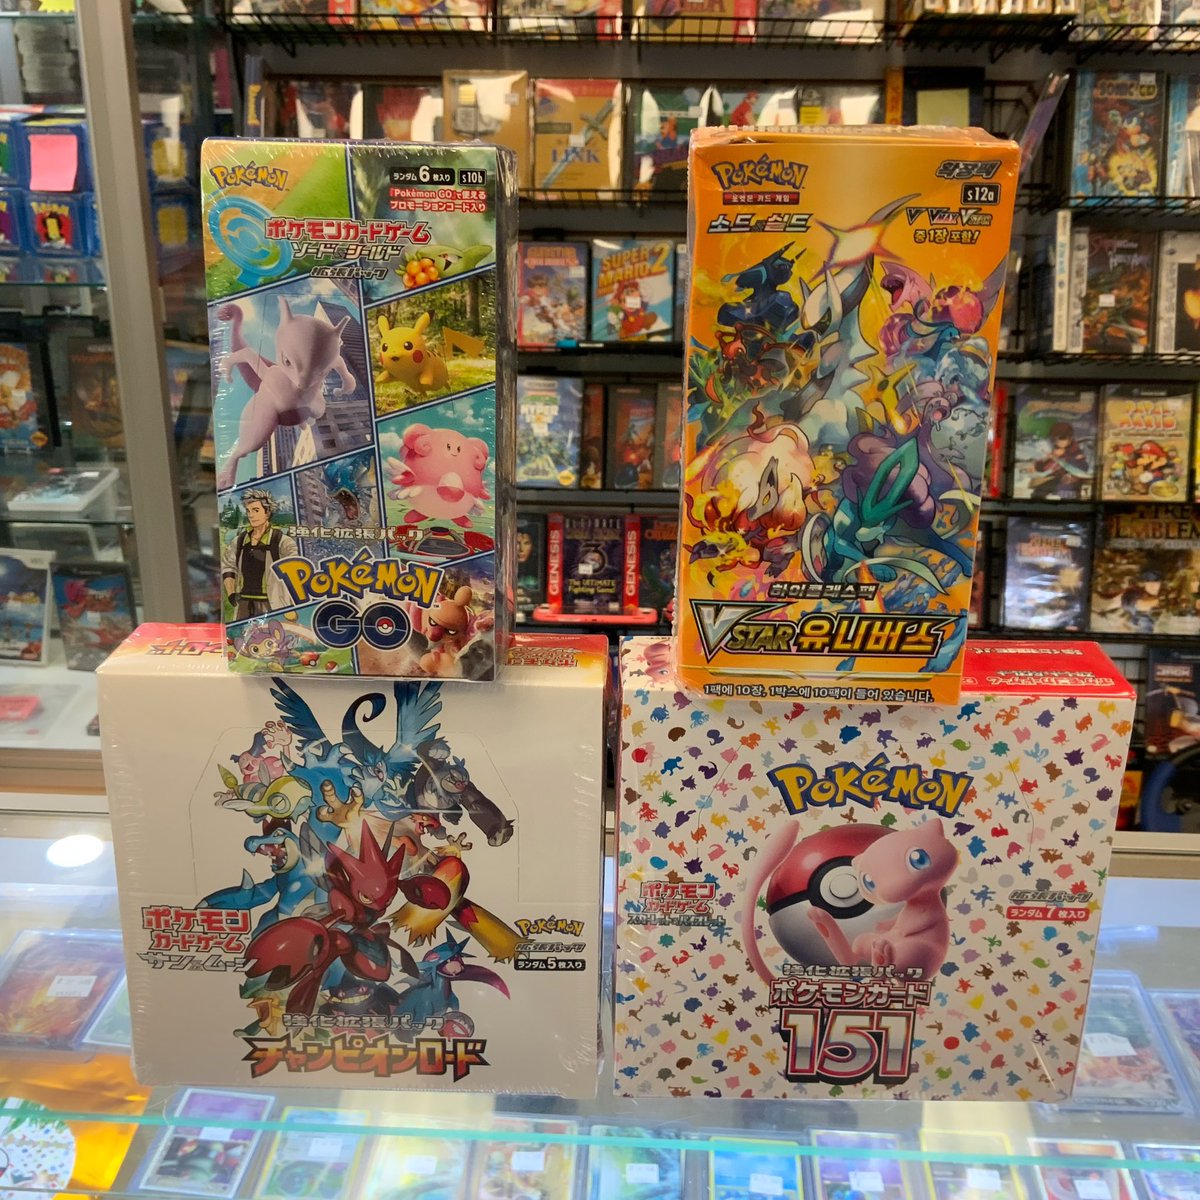 We are always getting more Pokémon cards in stock! Stop in to see what we currently have available! #pokemon #pokemoncards #pokemontcg #pokemoncommunity #pokemongo #pokemon151 #pokemon151box #pokemonvstar #151 #retroreplaybelair #maryland #shoplocal